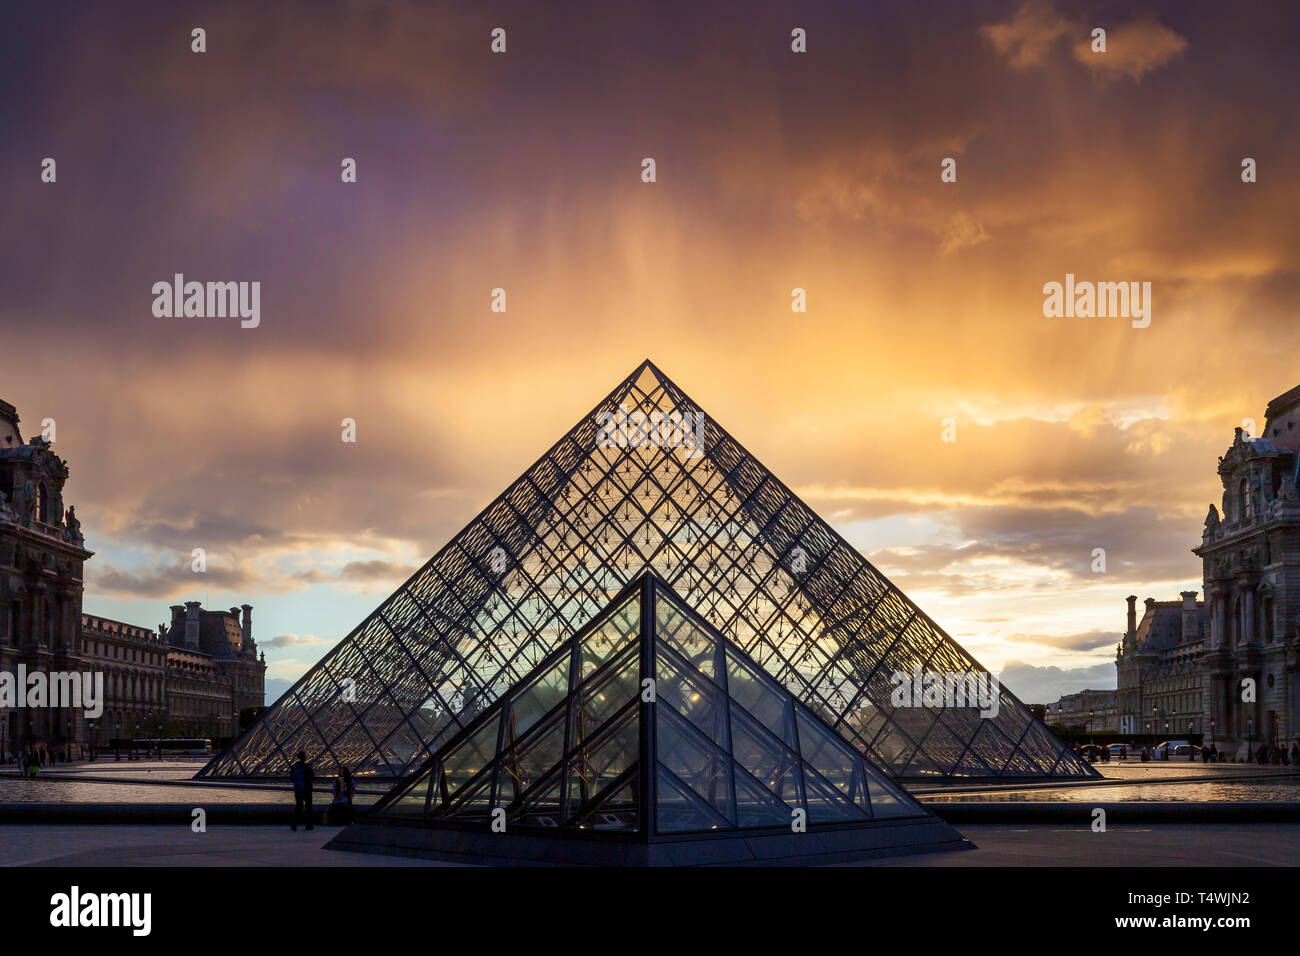 Clearing rainstorm over the iconic glass pyramid in the courtyard of Musee du Louvre, Paris, France Stock Photo